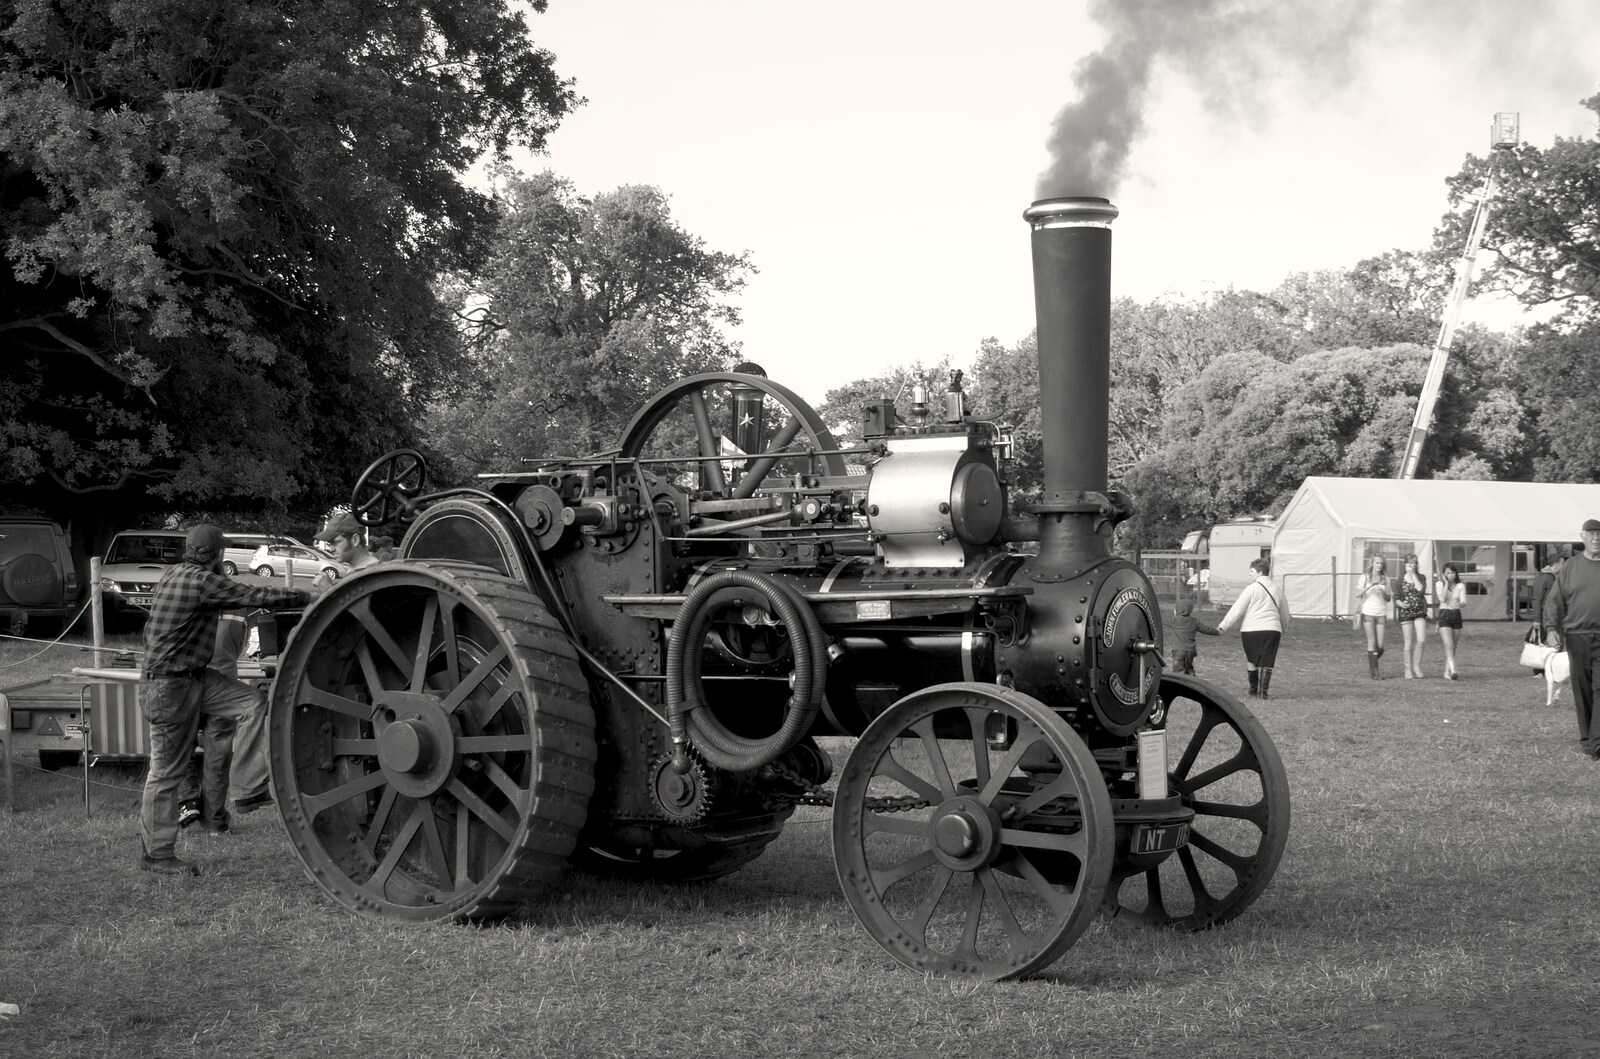 The Eye Show, Palgrave, Suffolk - 30th August 2010: A smoking traction engine